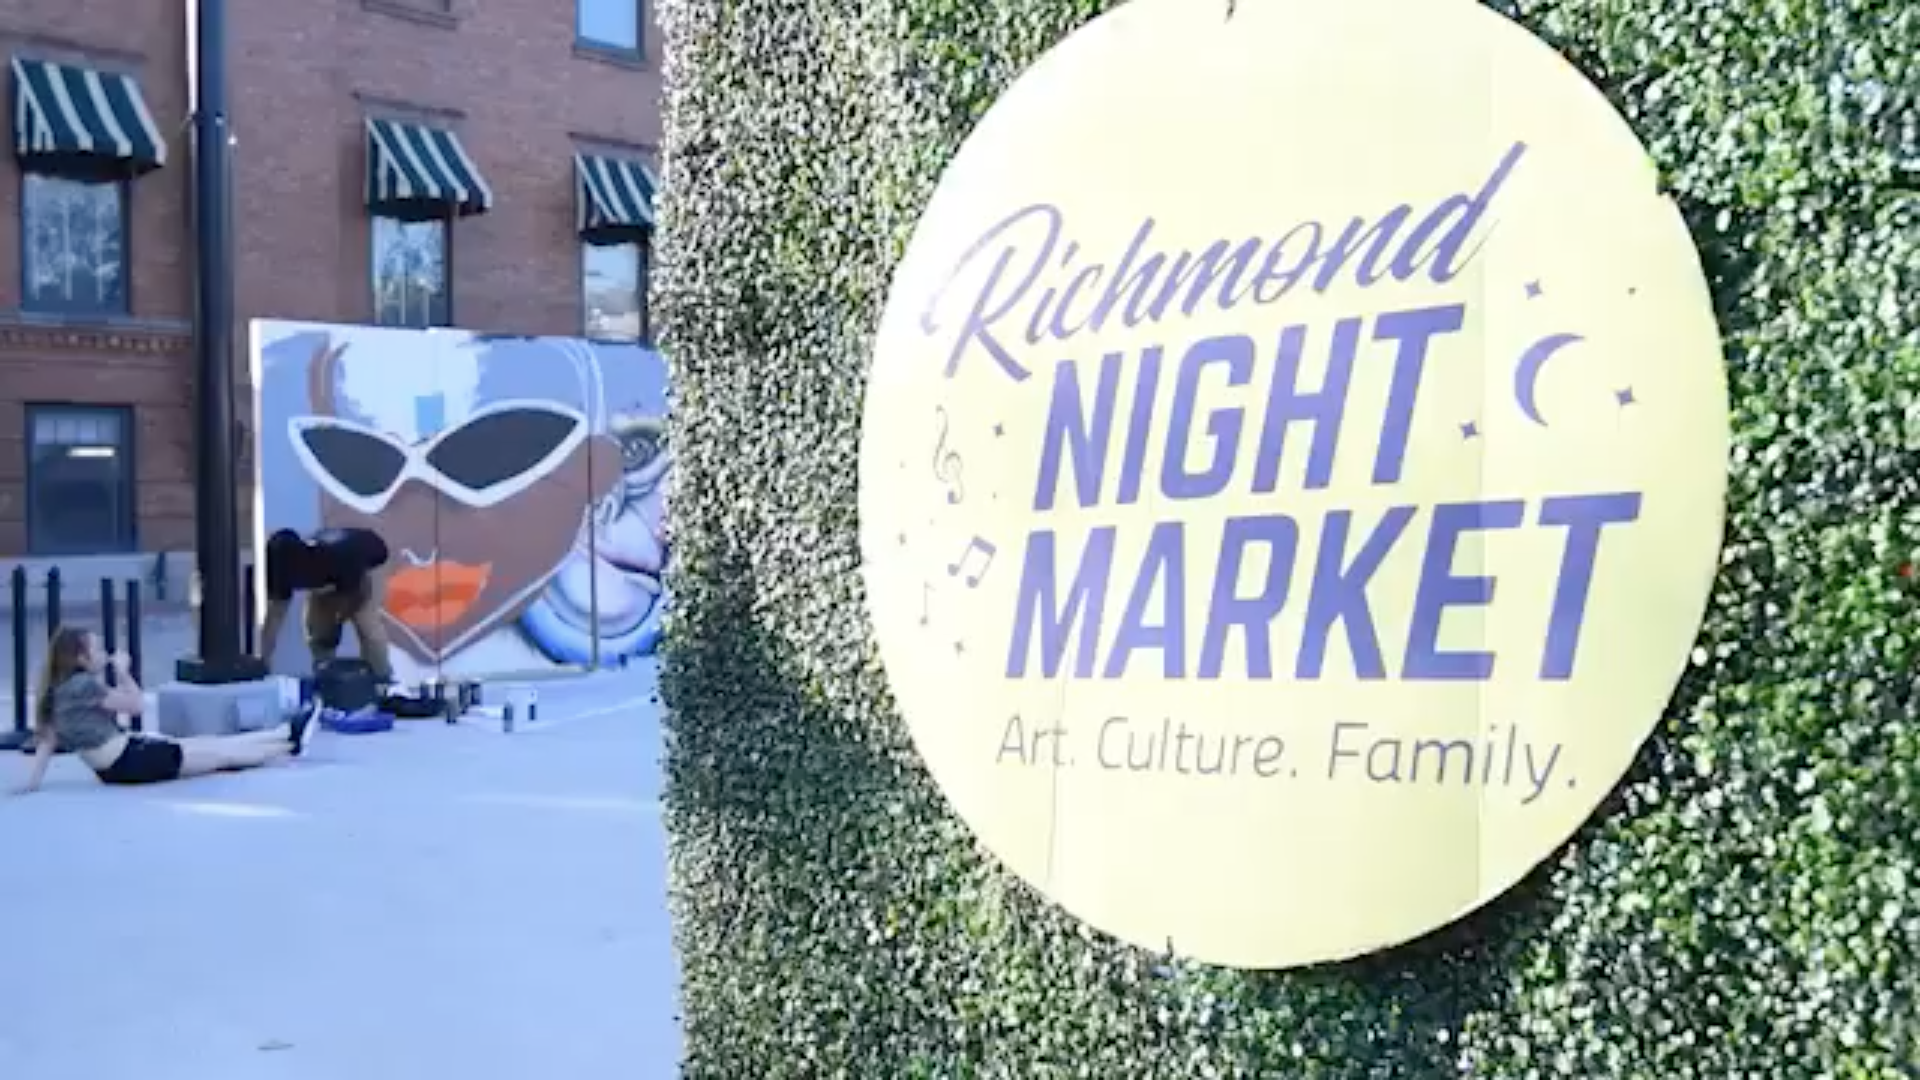 Screenshot from Richmond Night Market video by @bso.creative